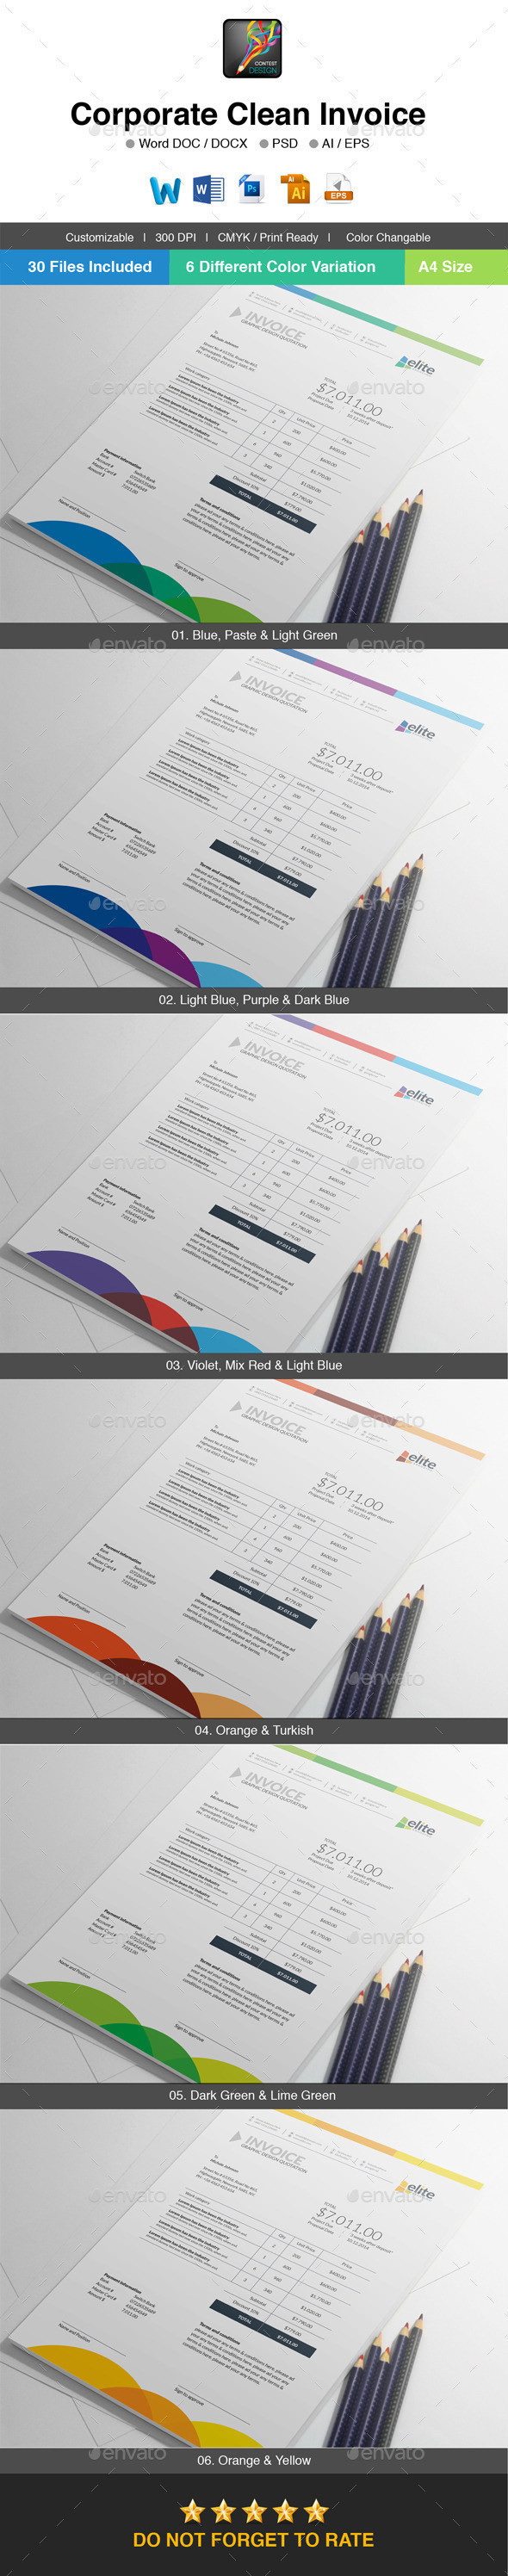 Elite corporate clean invoice template image preview